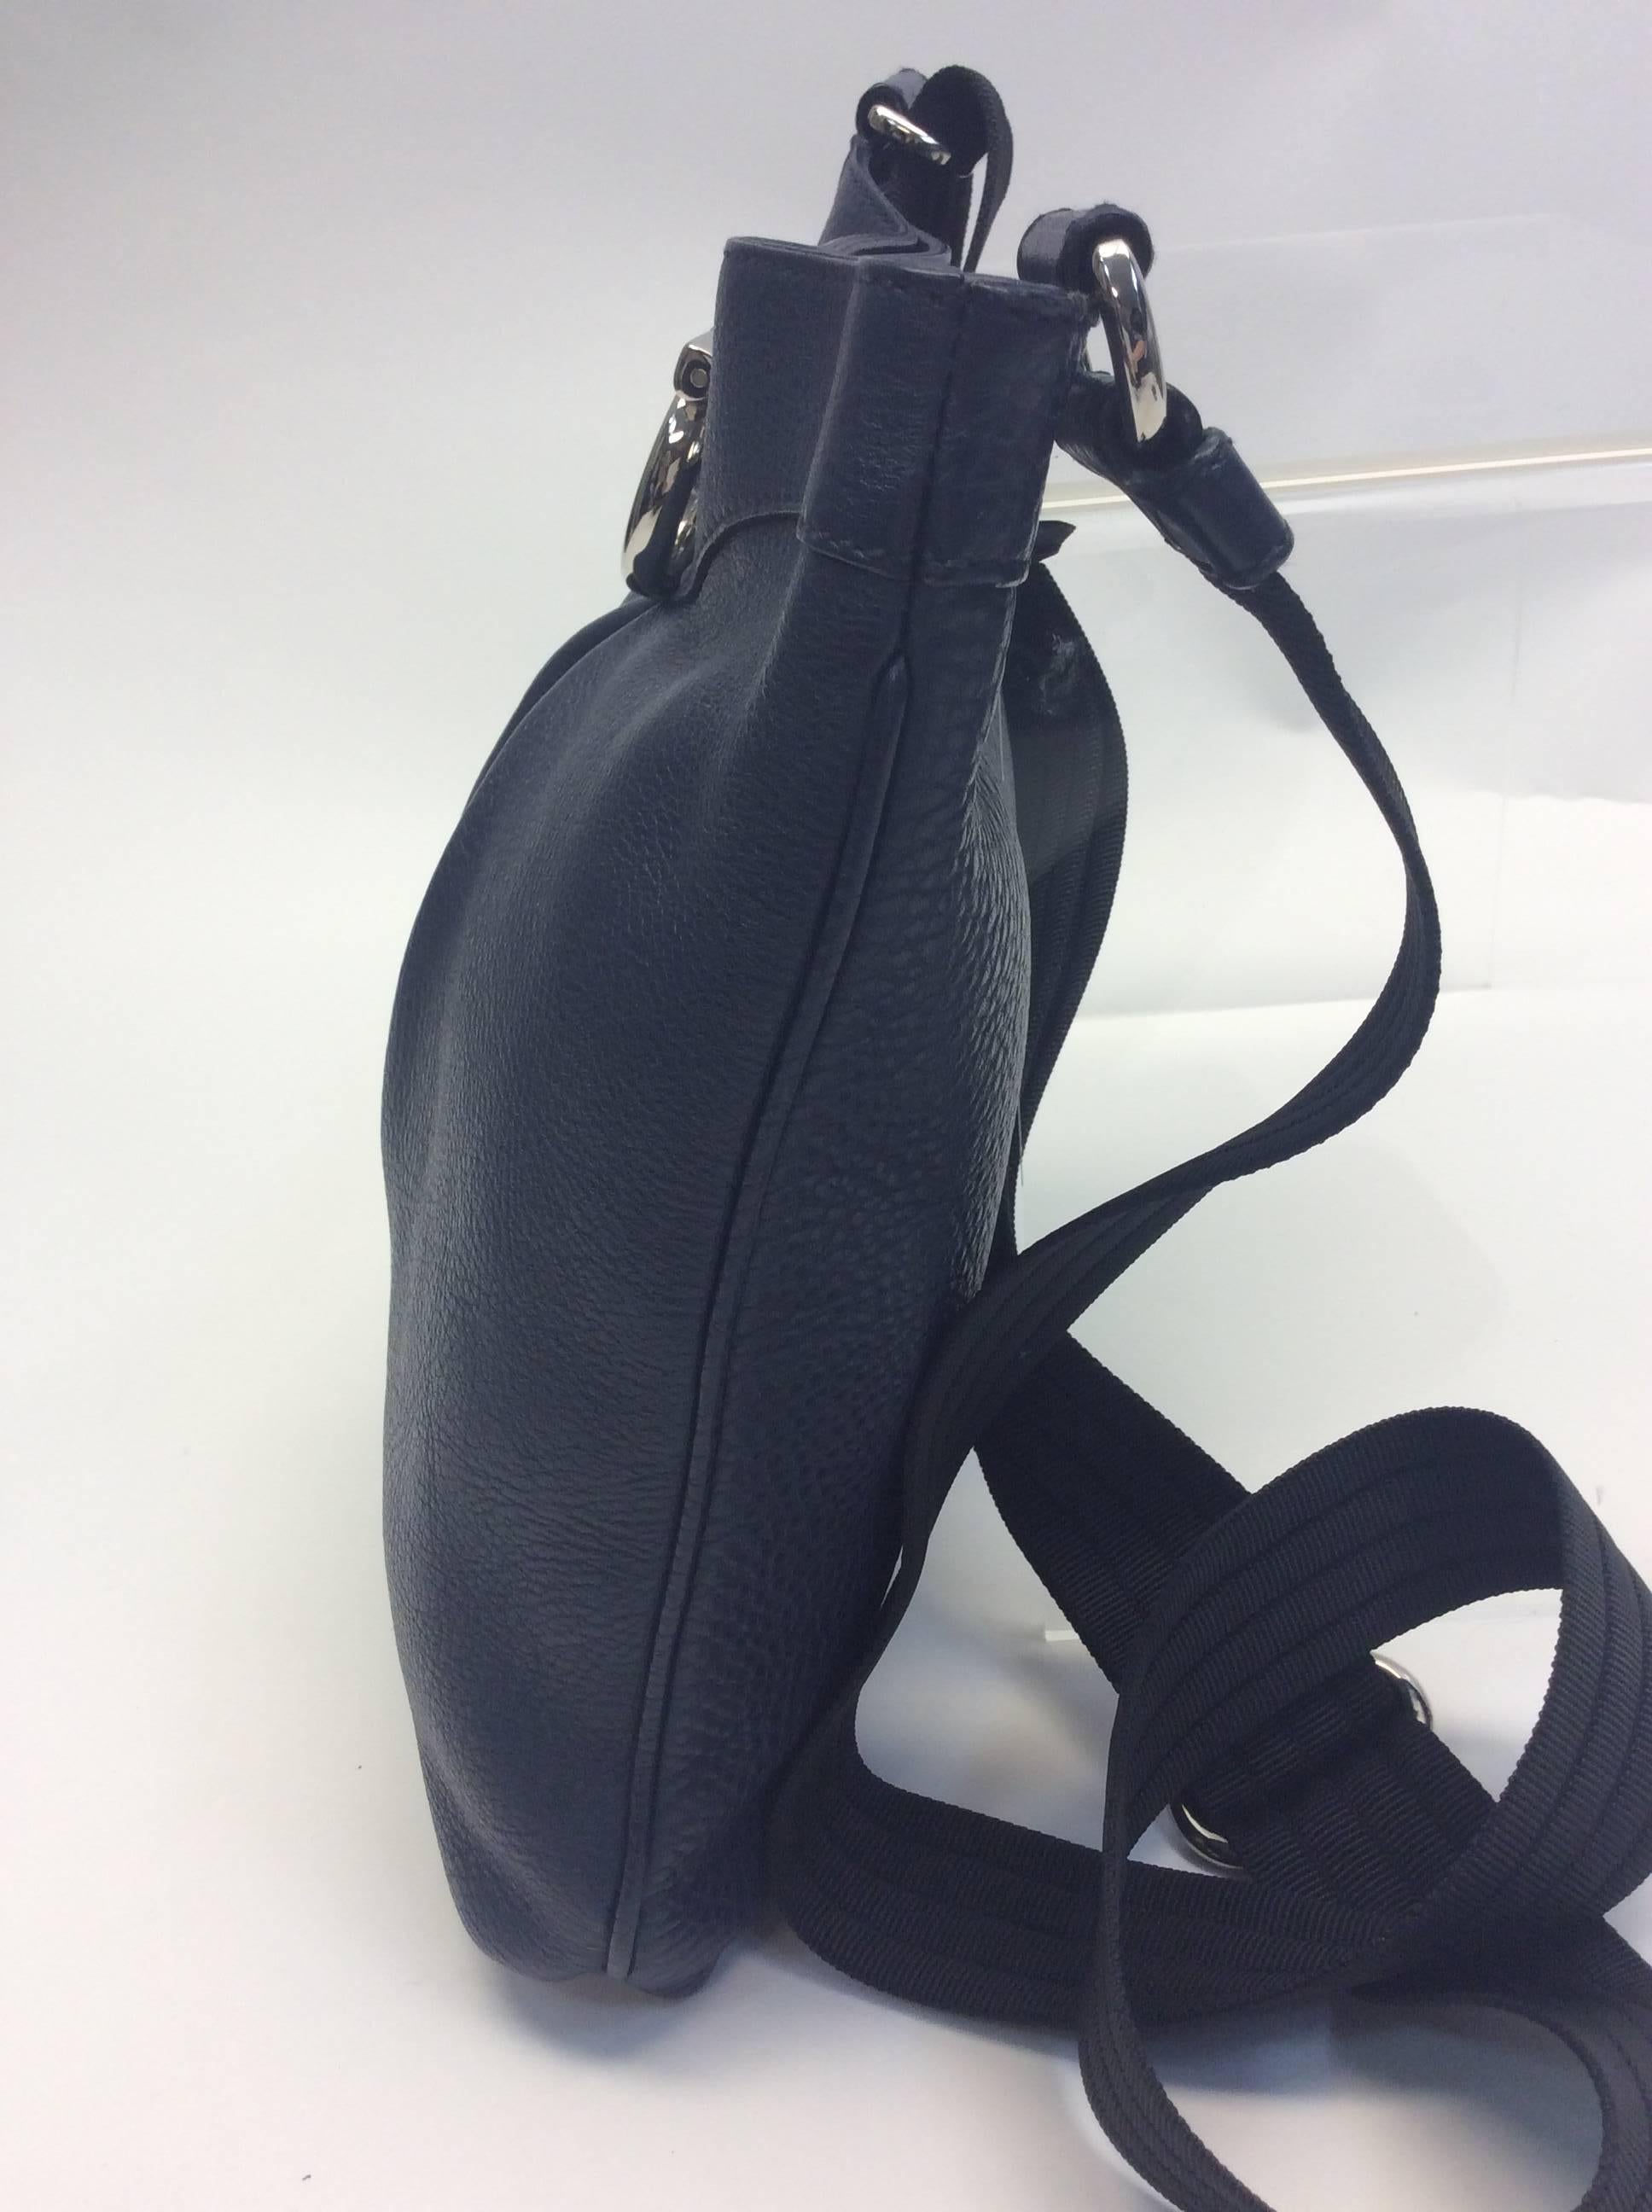 Salvatore Ferragamo Navy Leather Crossbody Bag In Excellent Condition For Sale In Narberth, PA